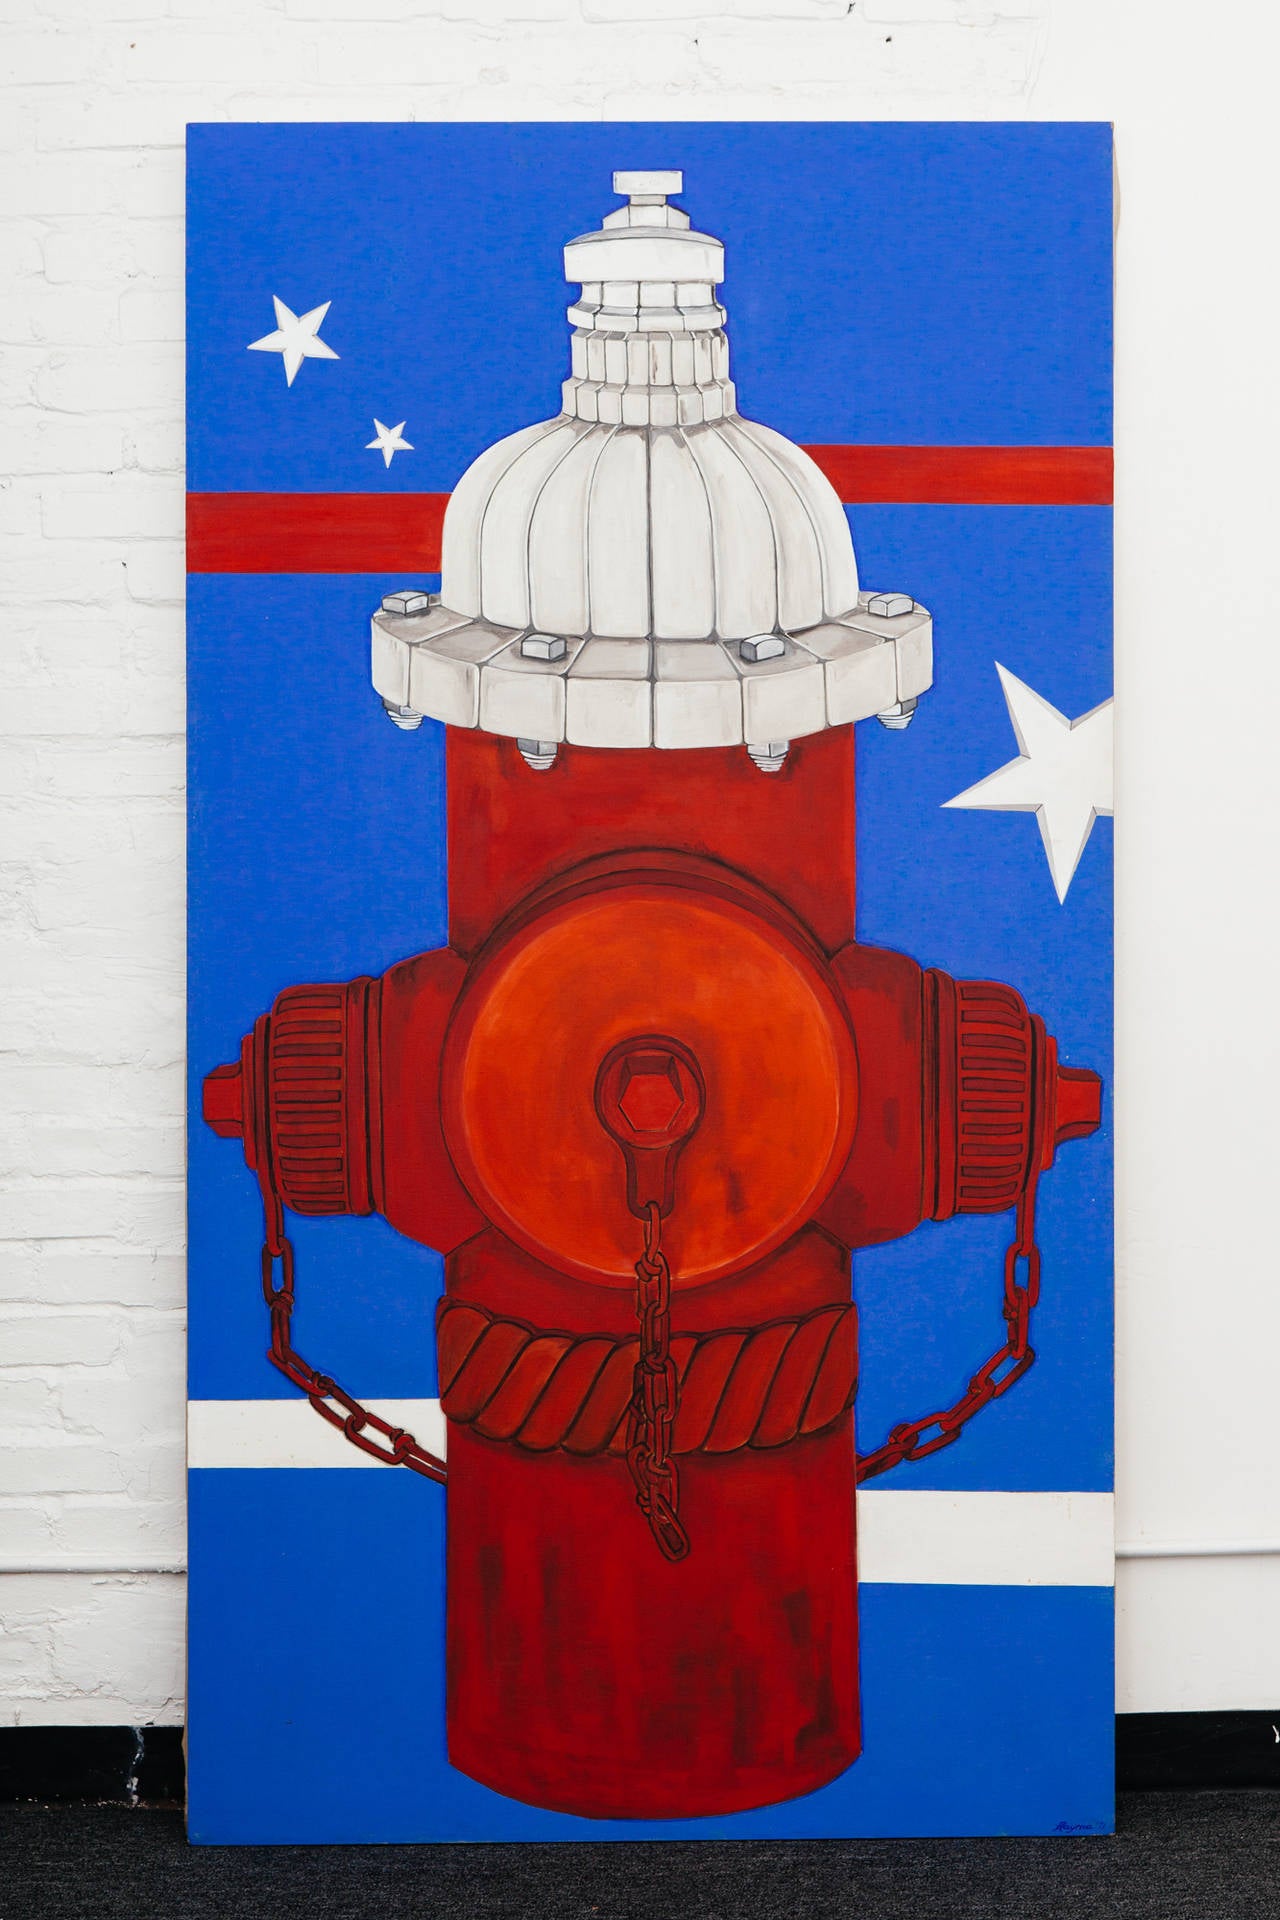 Huge 1971 pop art oil on canvas of a fire hydrant resembling the American flag and the Capital Hill.
Signed by artist 